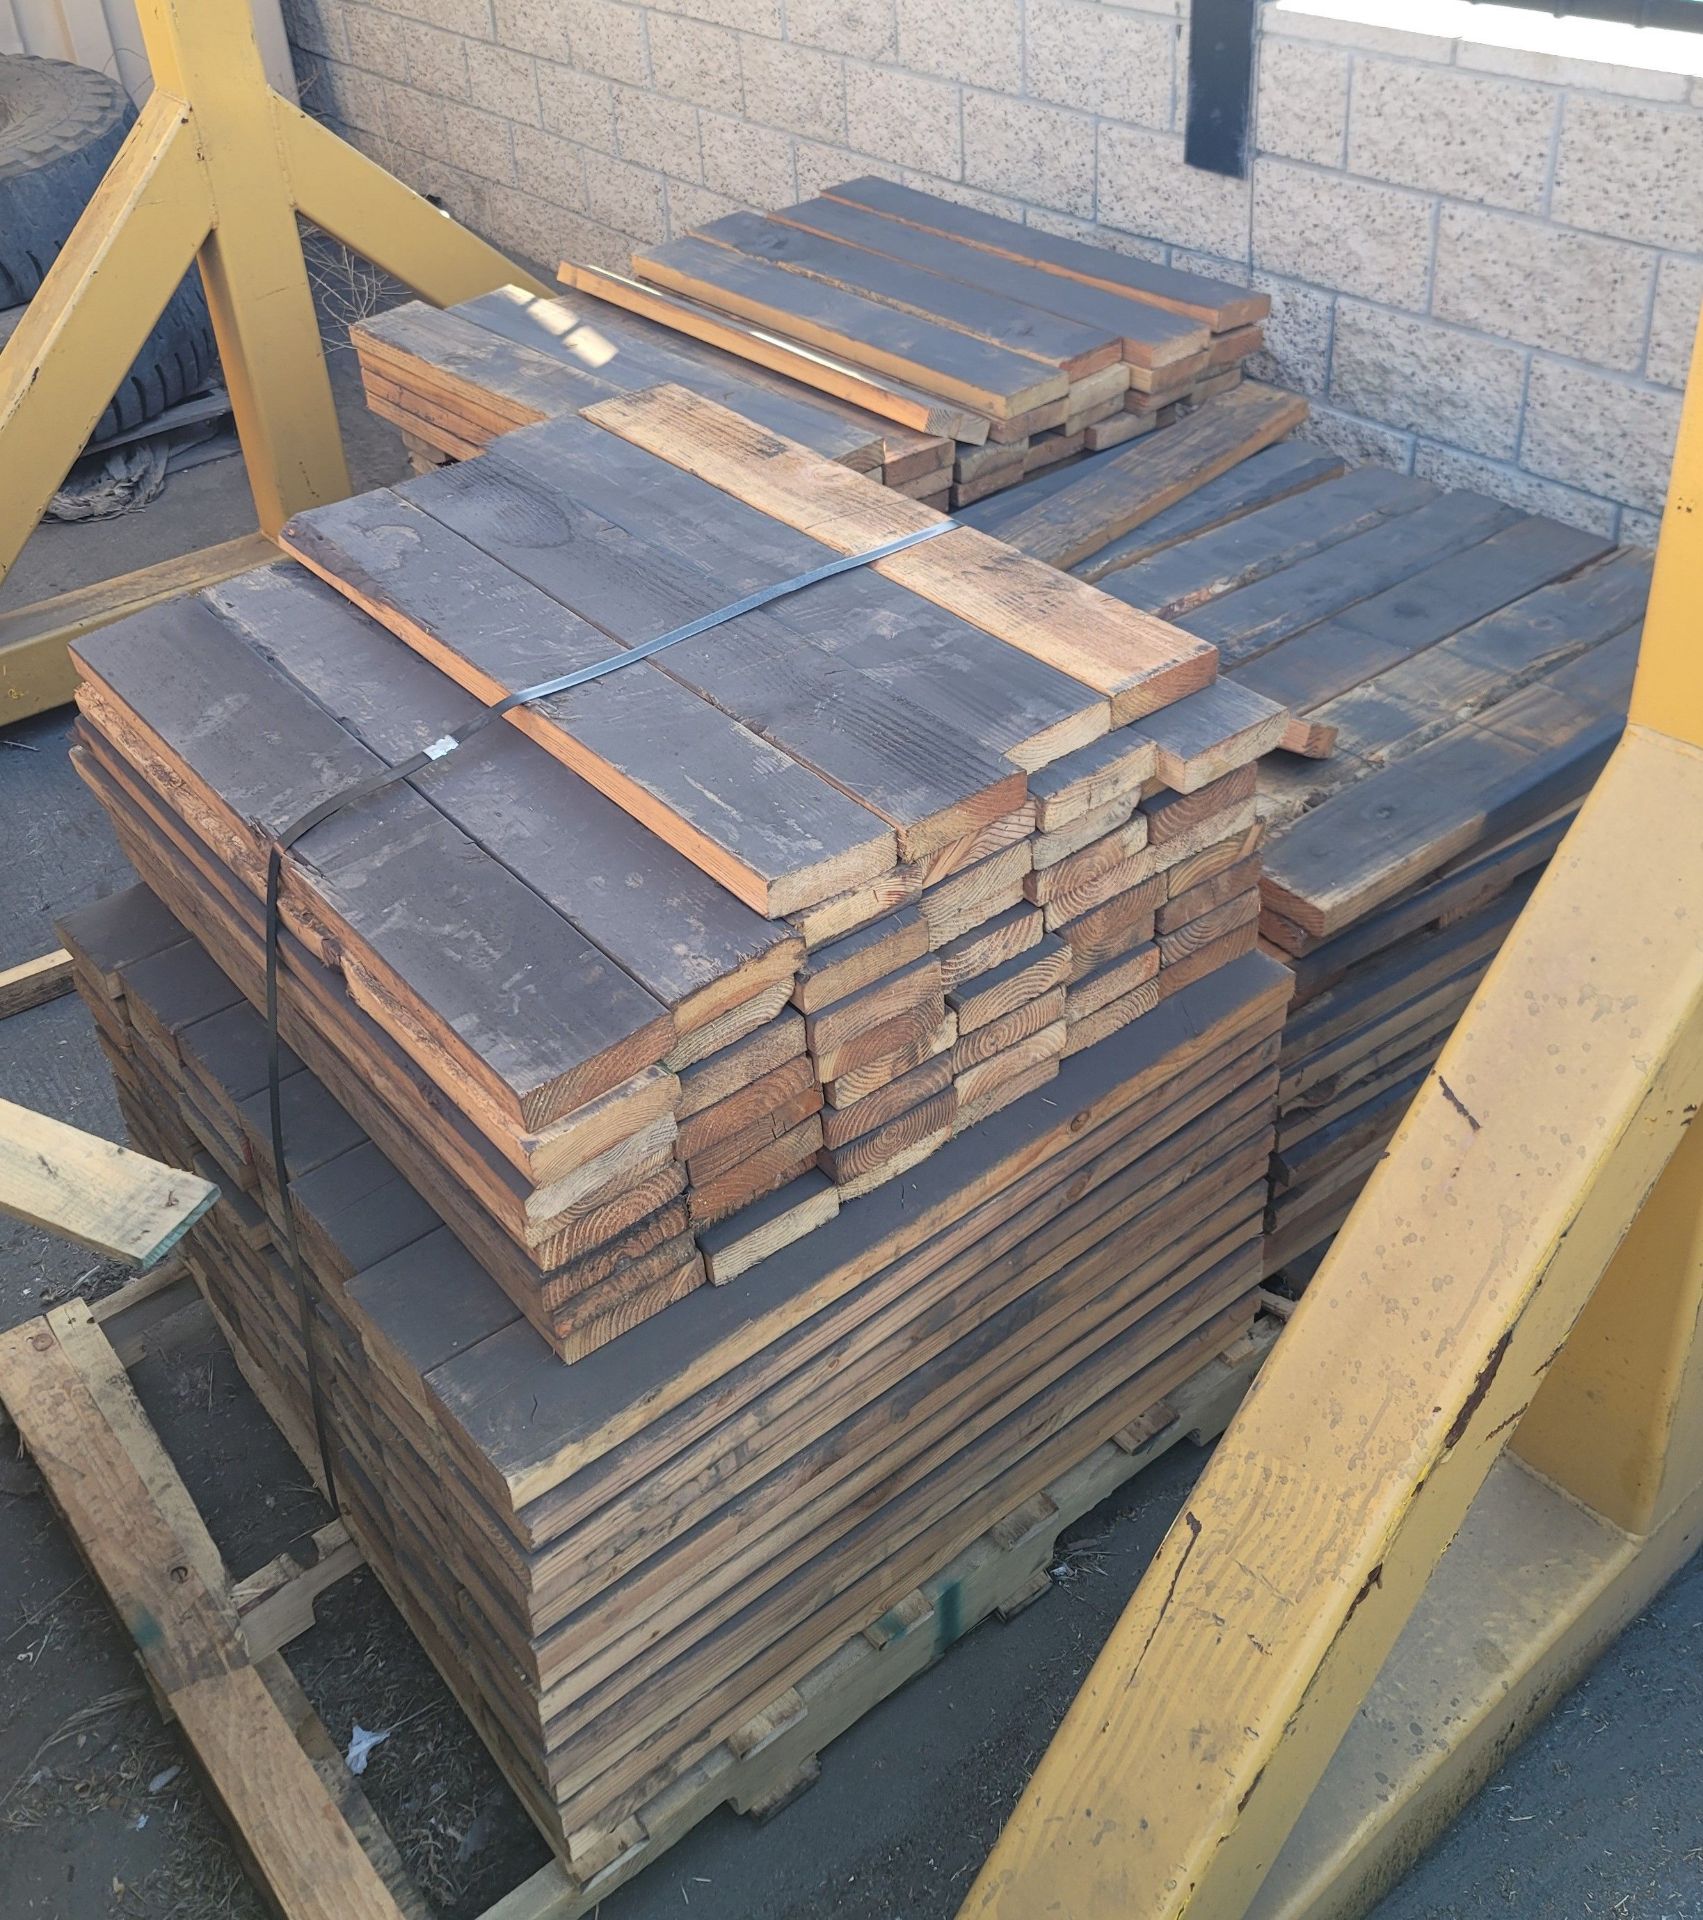 LOT - STACK OF PALLET RACKING, TO INCLUDE 12' X 40" UPRIGHTS, 8' BEAMS, (3) PALLETS OF 2" X 6" X 36" - Image 4 of 4